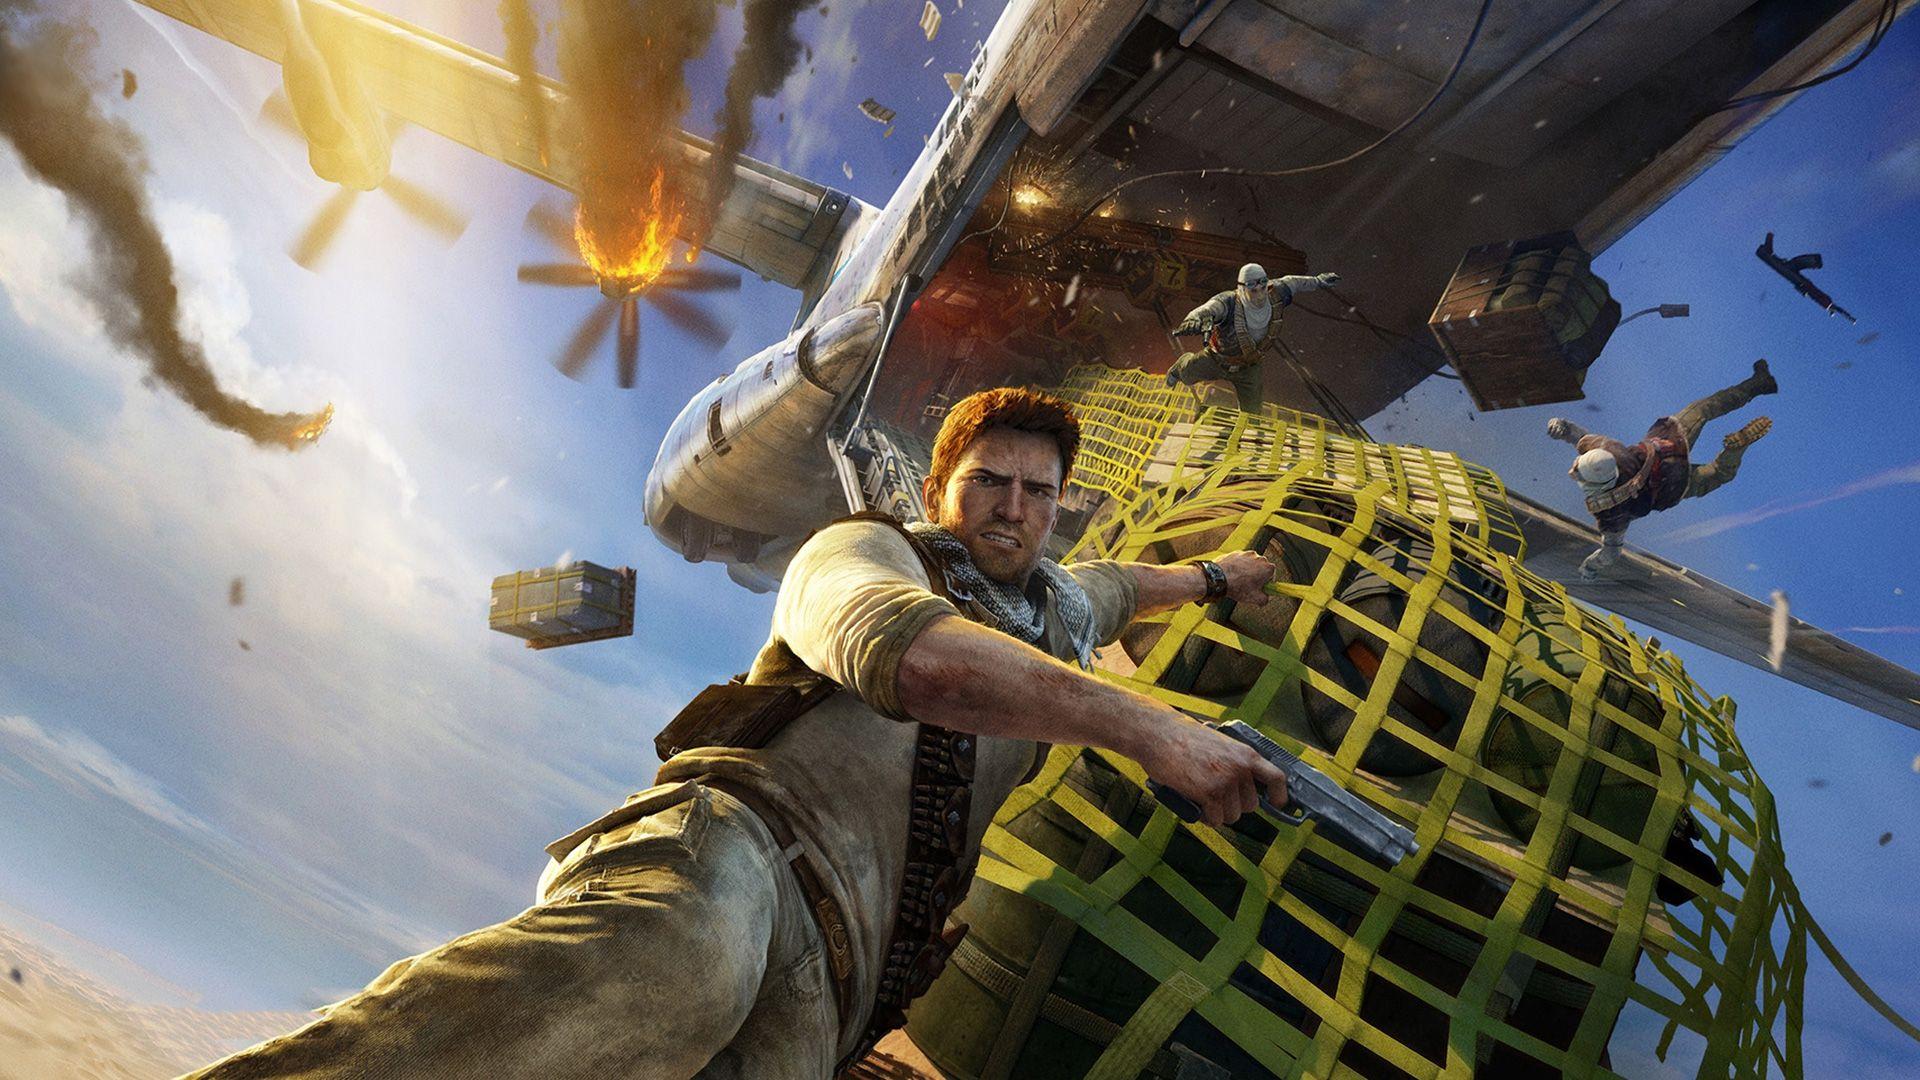 Uncharted 3 is the game that is the peak Uncharted experience. It is the undisputed best game on our list of Uncharted games ranked. The plane's flight sequence symbolizes Uncharted 3 as the high point of the franchise.